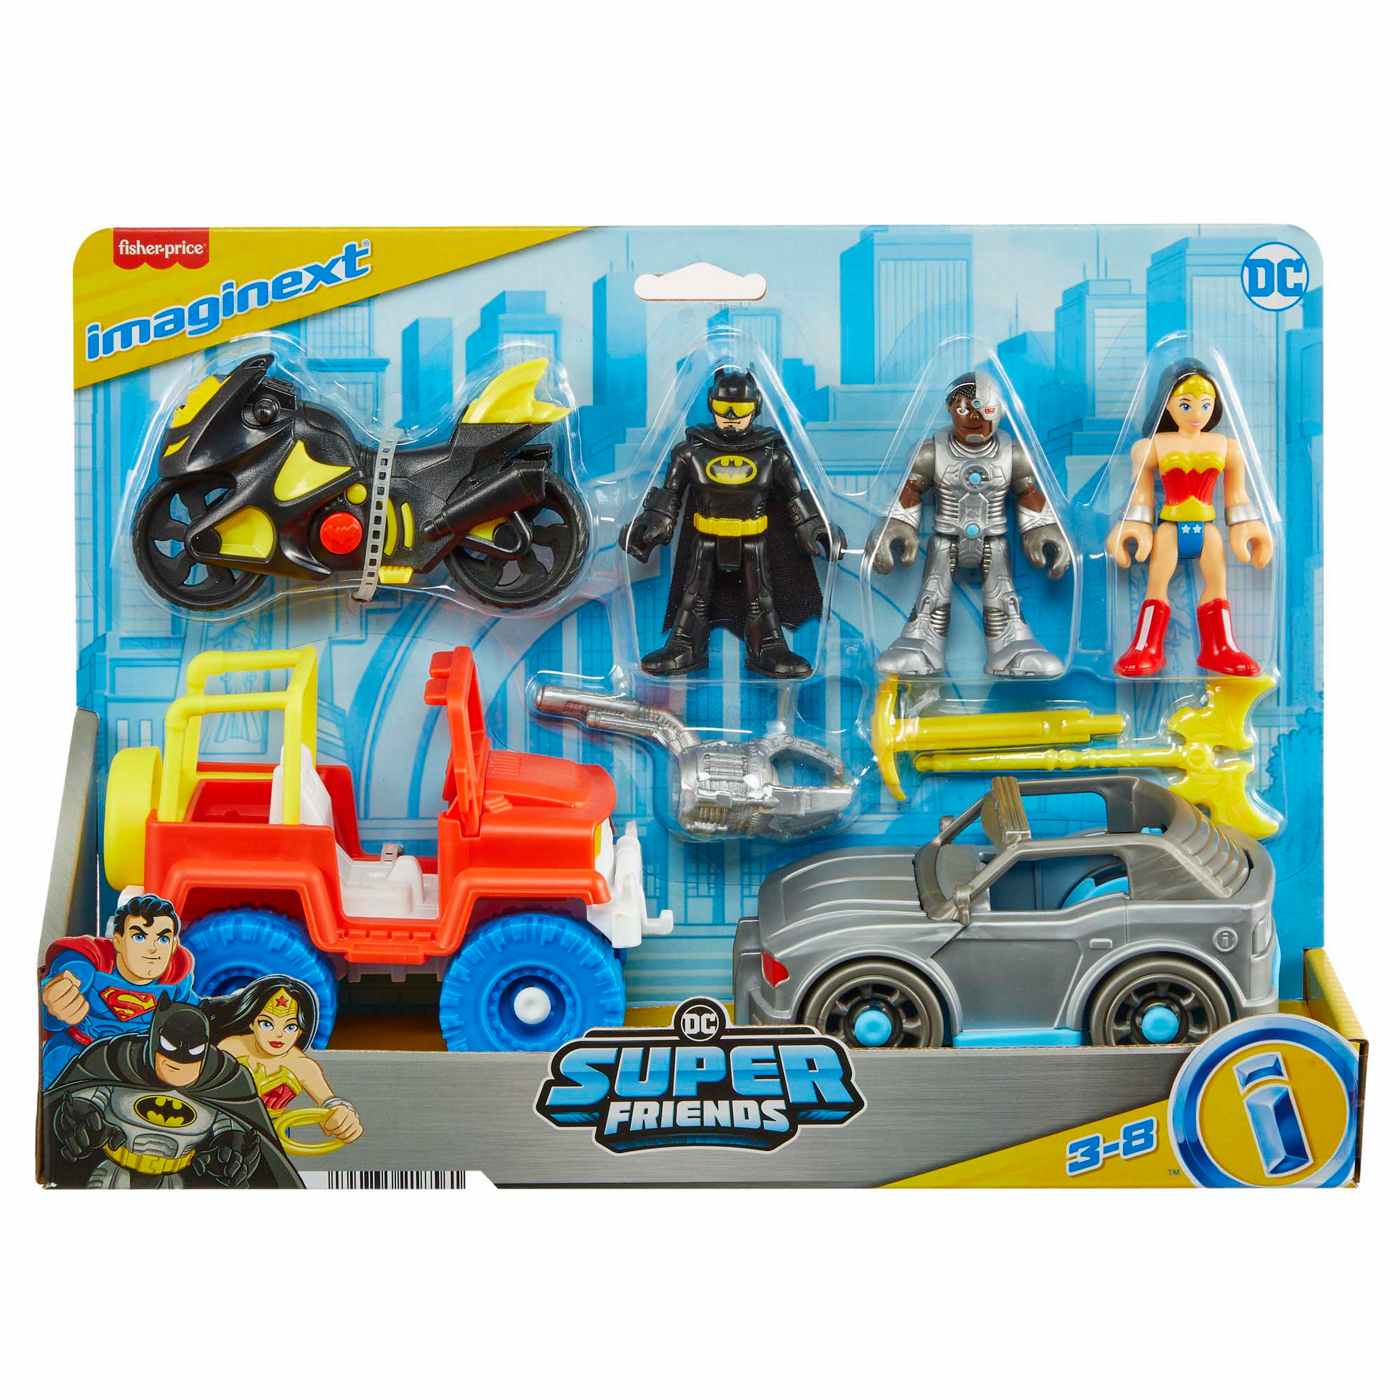 Imaginext DC Super Friends Heroes Action Figure Playset; image 1 of 2